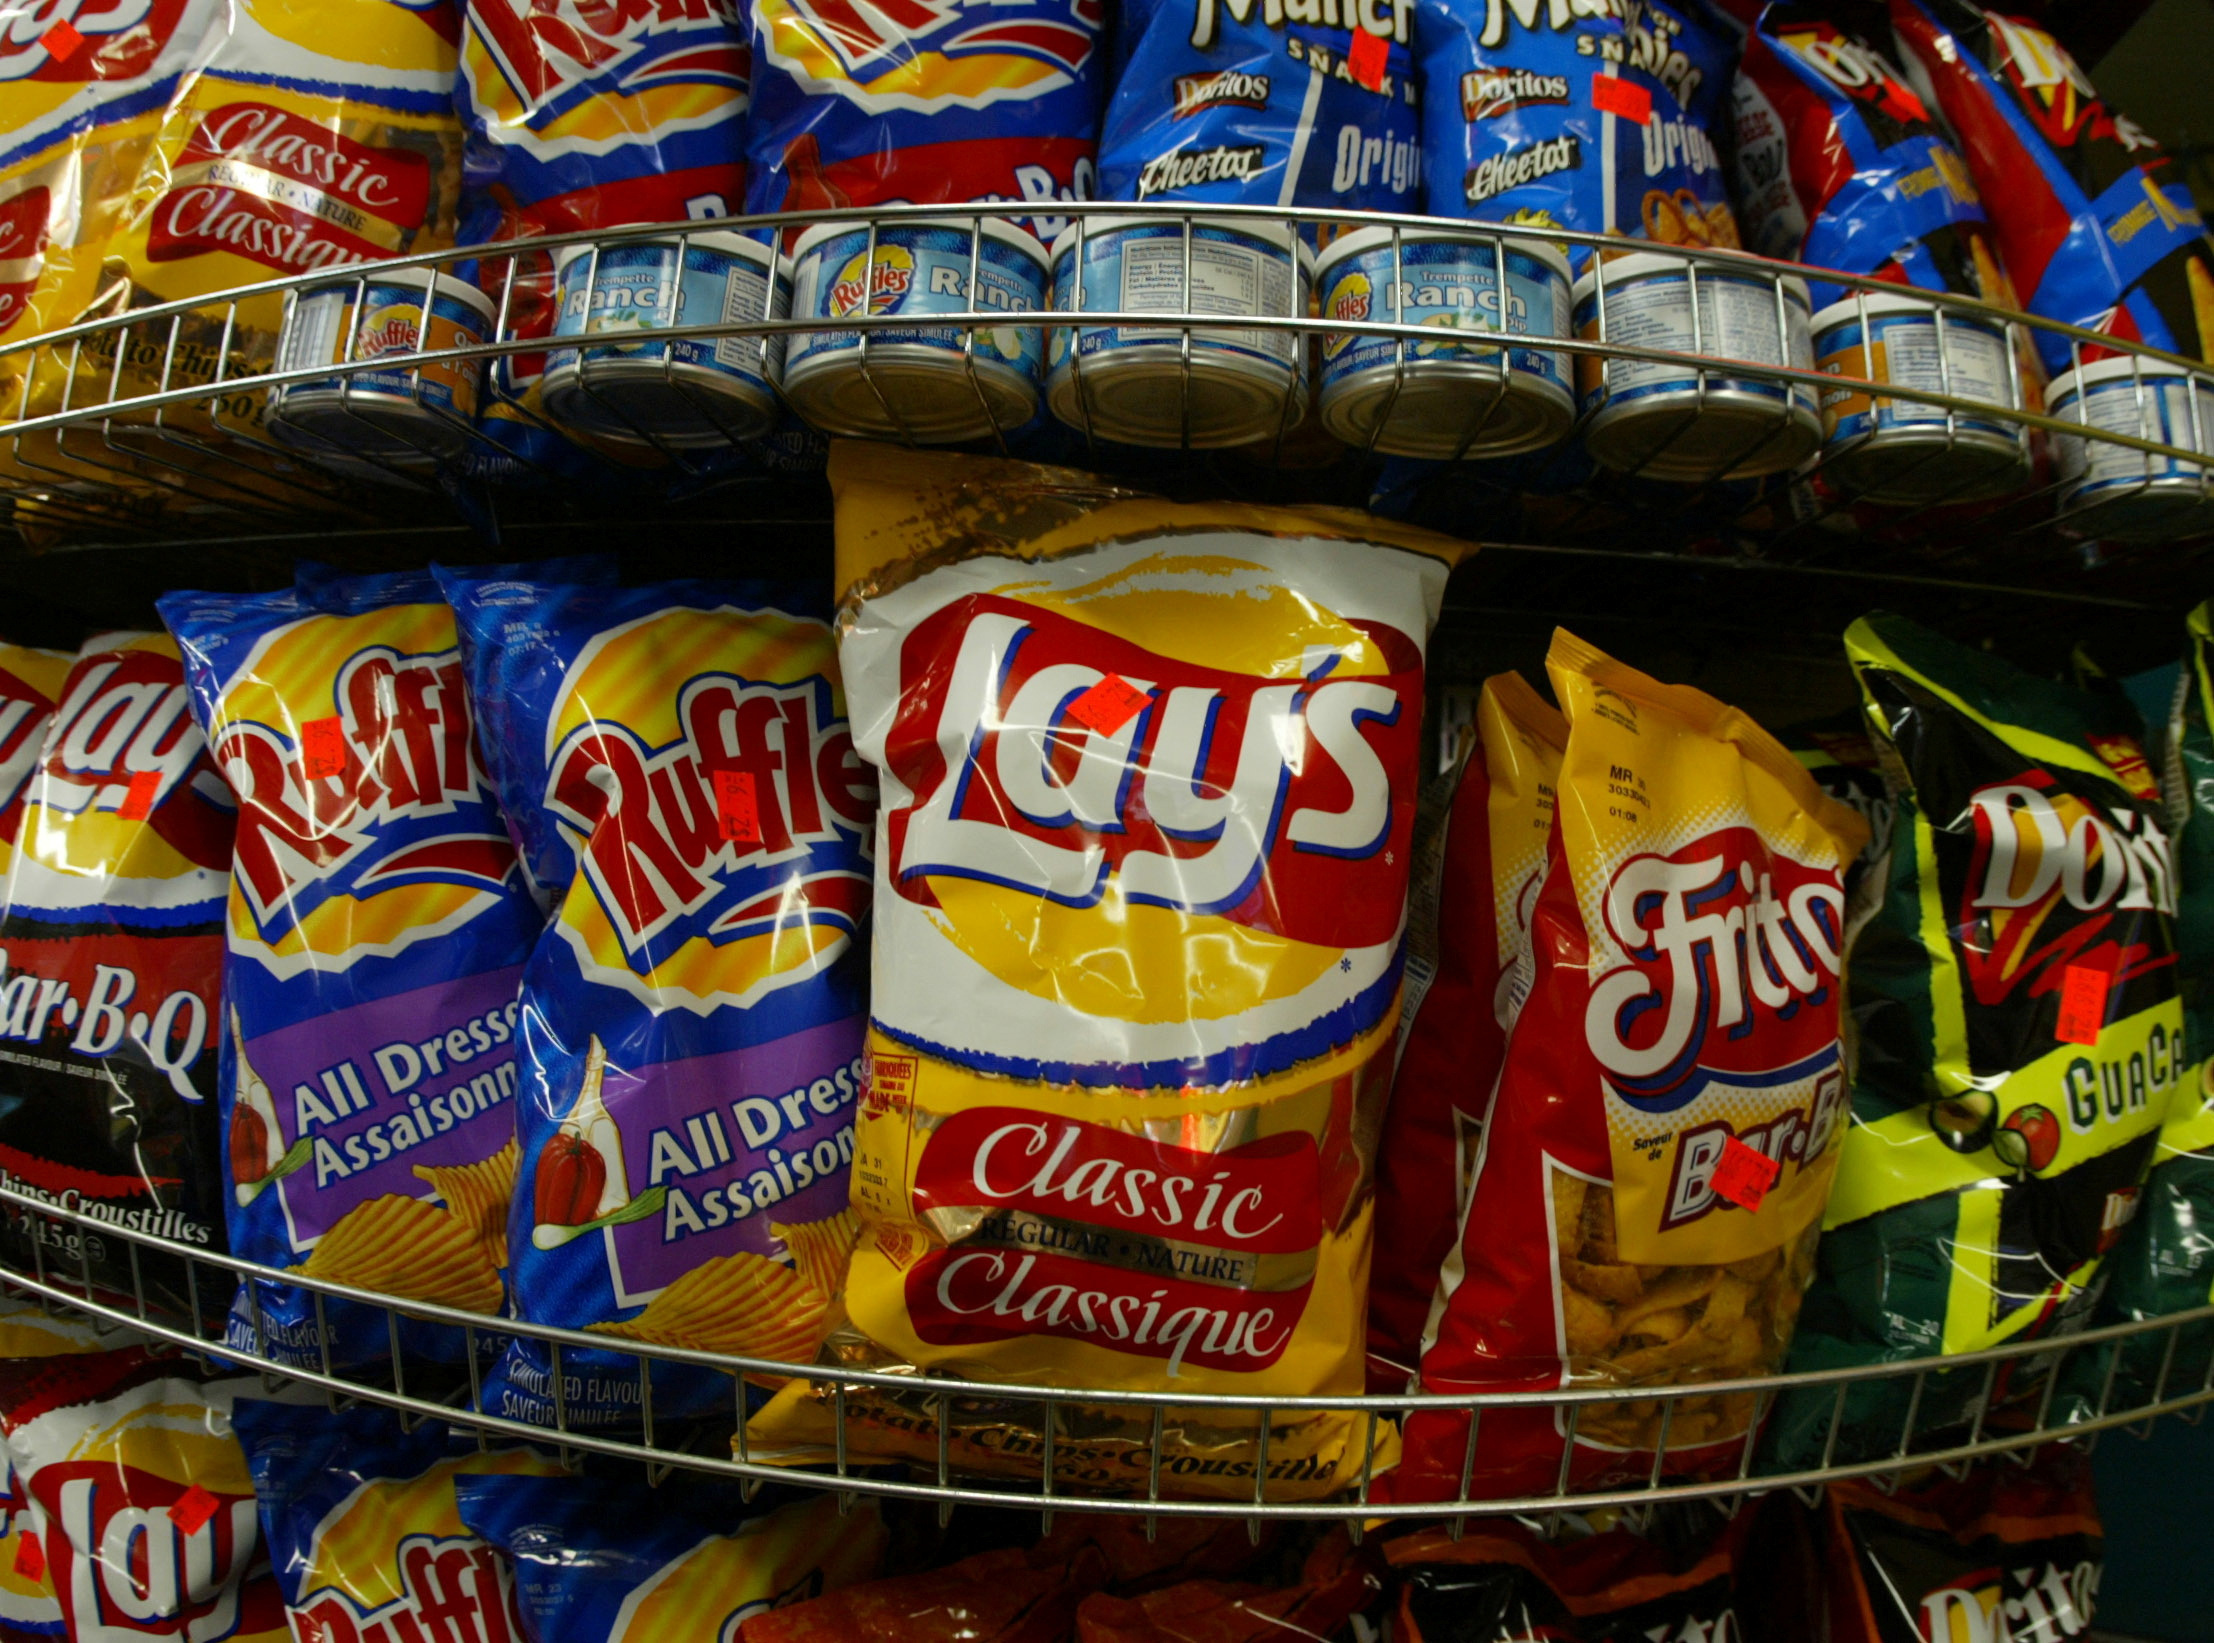 PHOTO OF LAYS POTATO CHIPS ON DISPLAY IN MONTREAL GROCERY STORE.